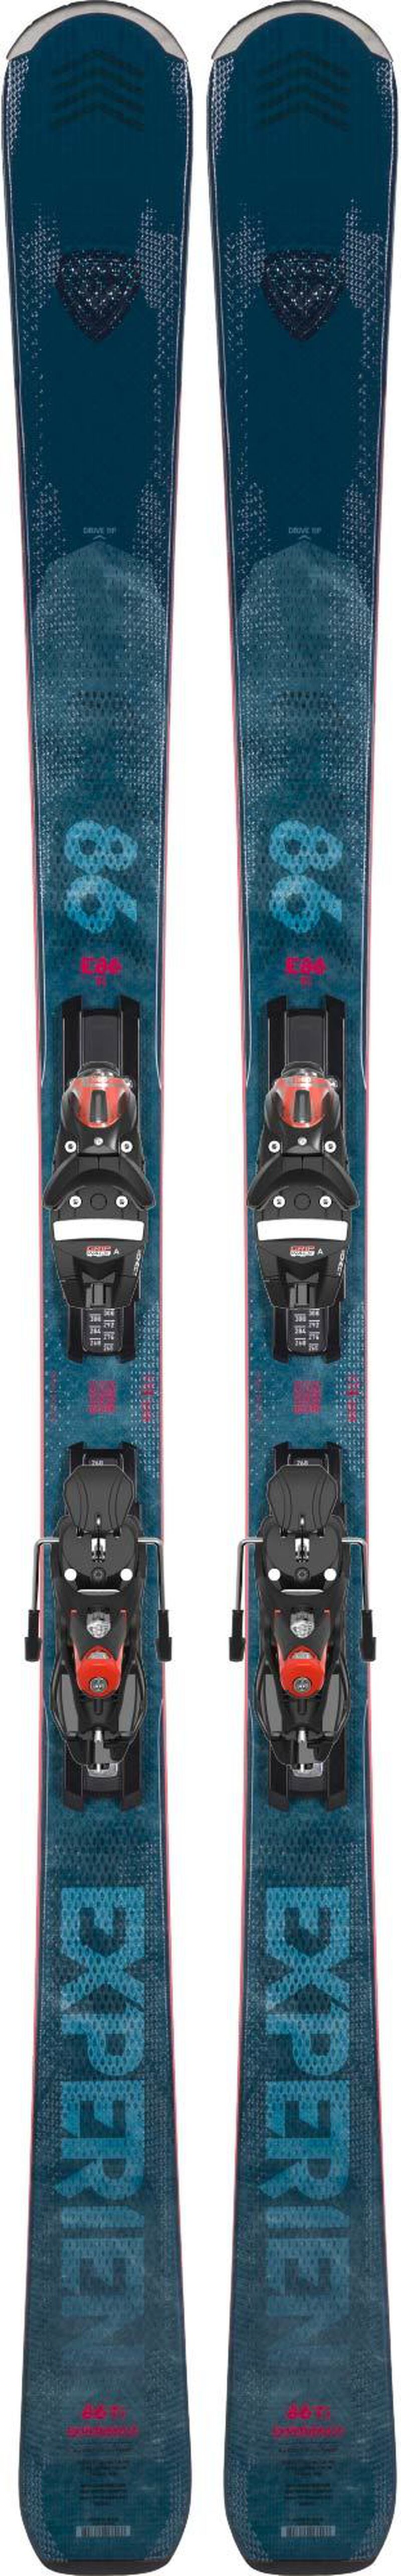 Rossignol Skis All Mountain homme EXPERIENCE 86 Ti (KONECT) blue